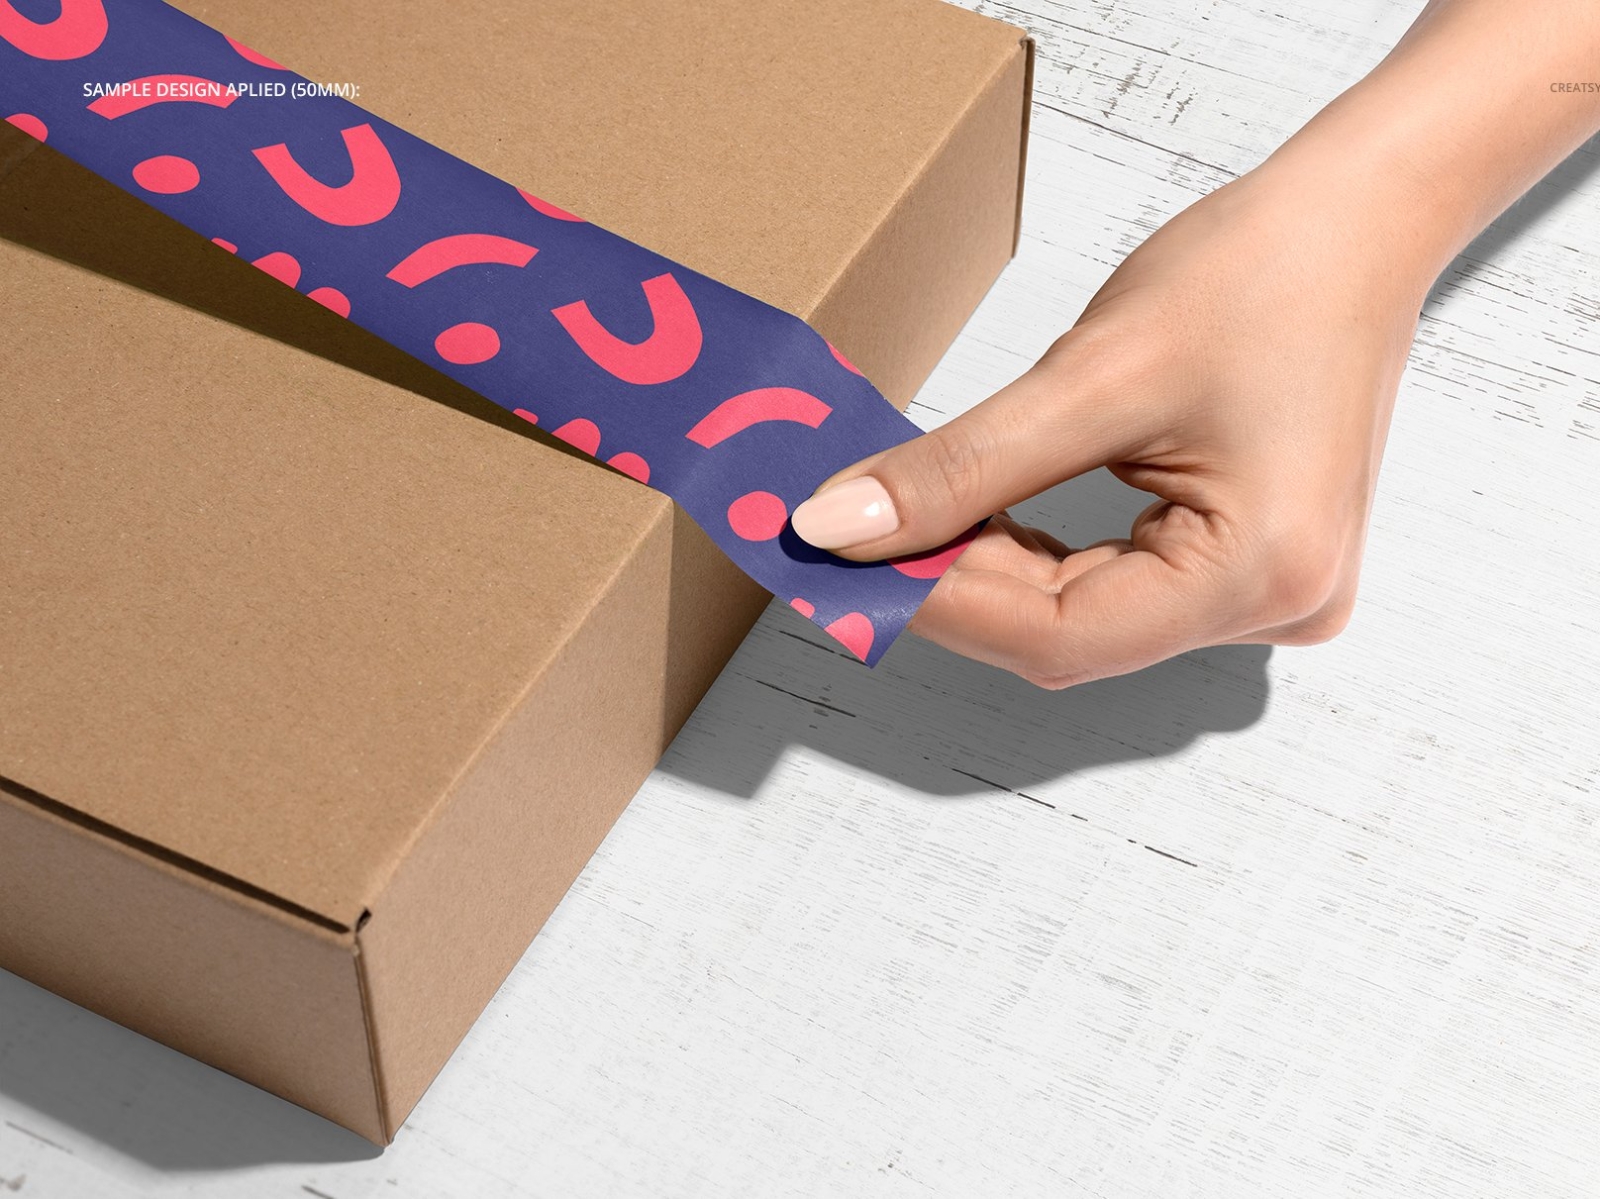 Download Noissue Packing Tape Mockup Set By Mockup5 On Dribbble PSD Mockup Templates